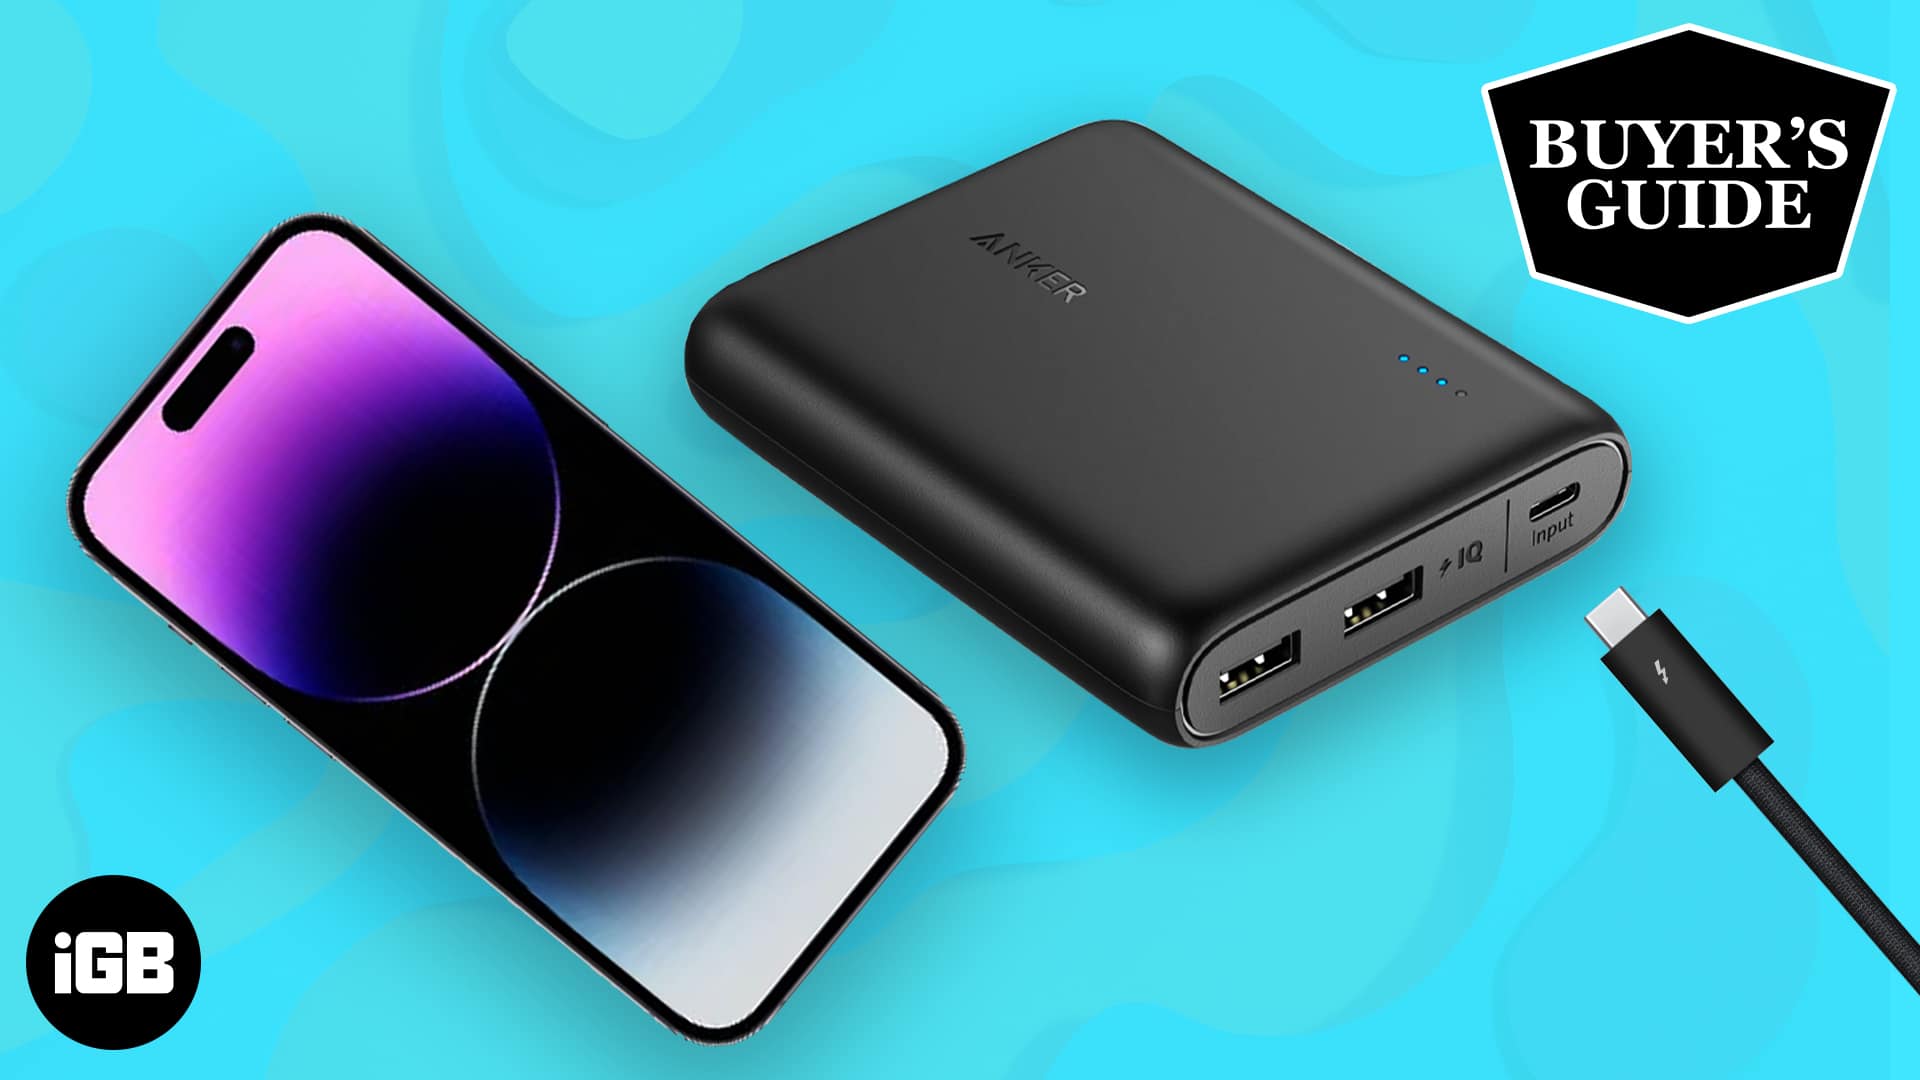 Usb c power banks for iphone